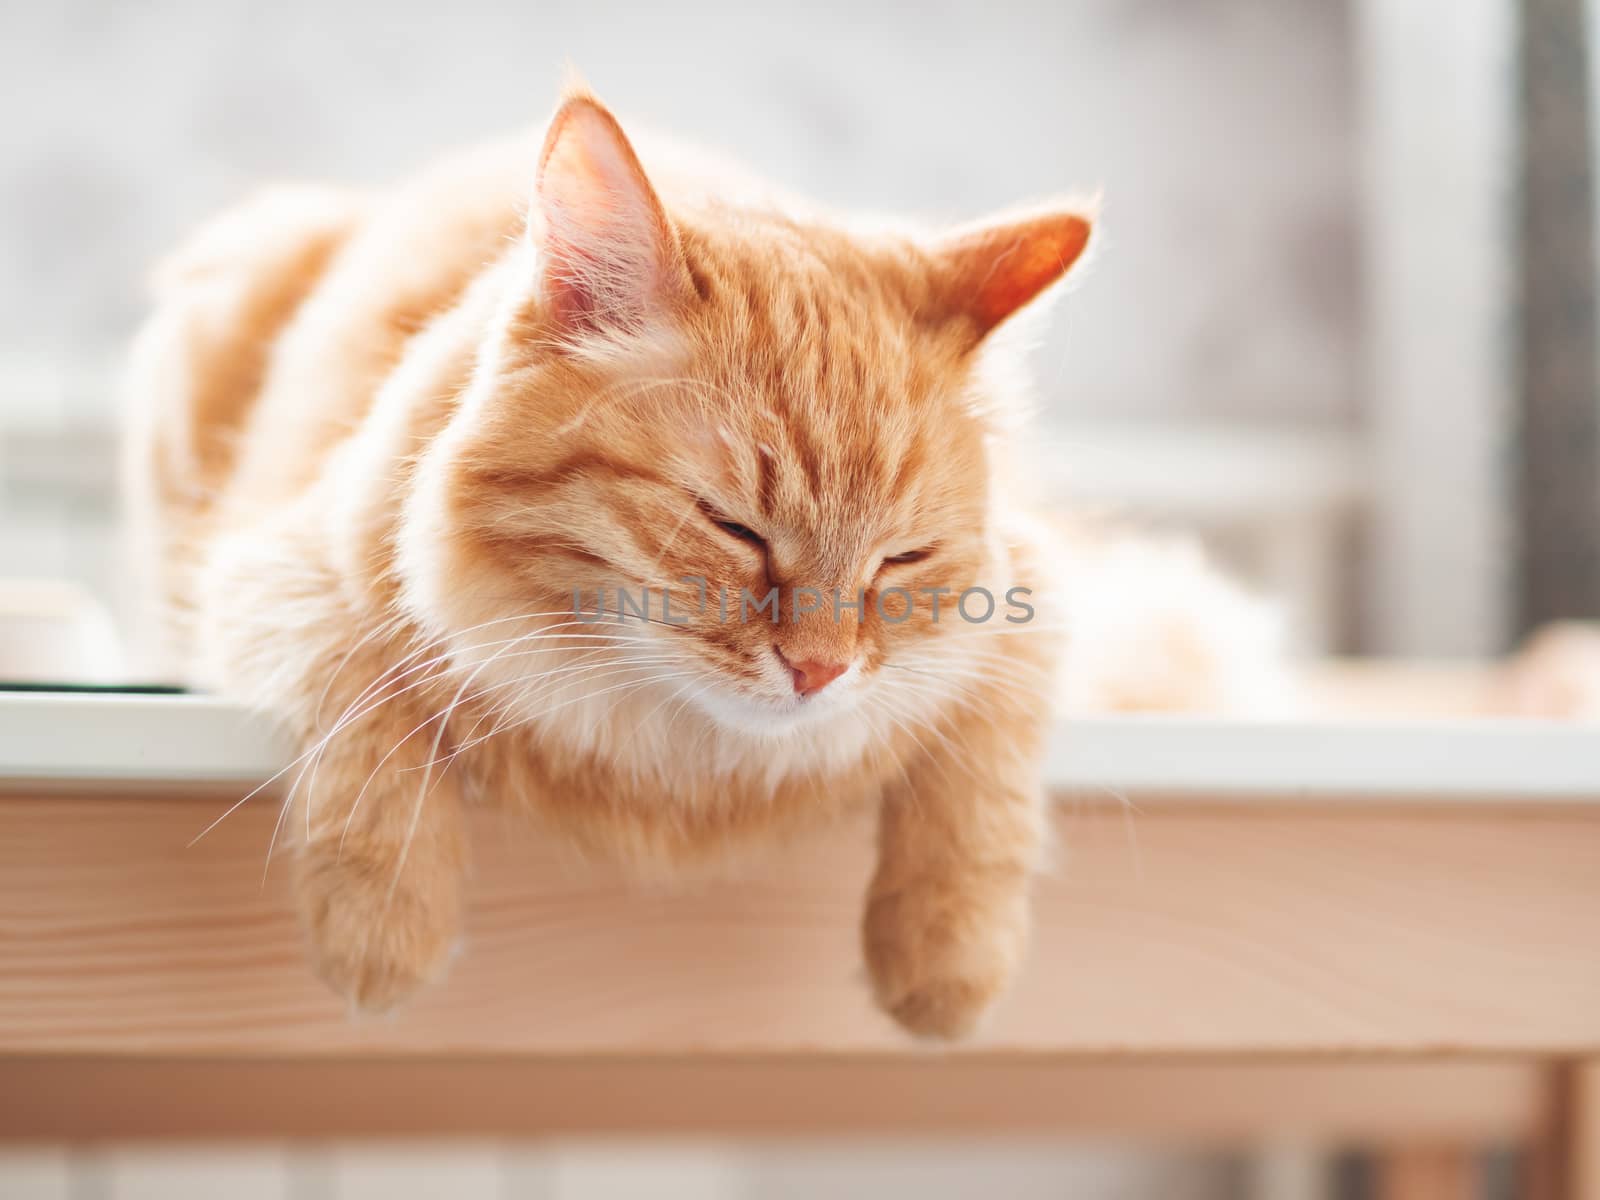 Close up portrait of cute ginger cat. Fluffy pet is sleeping. Domestic kitty sitting on table. by aksenovko